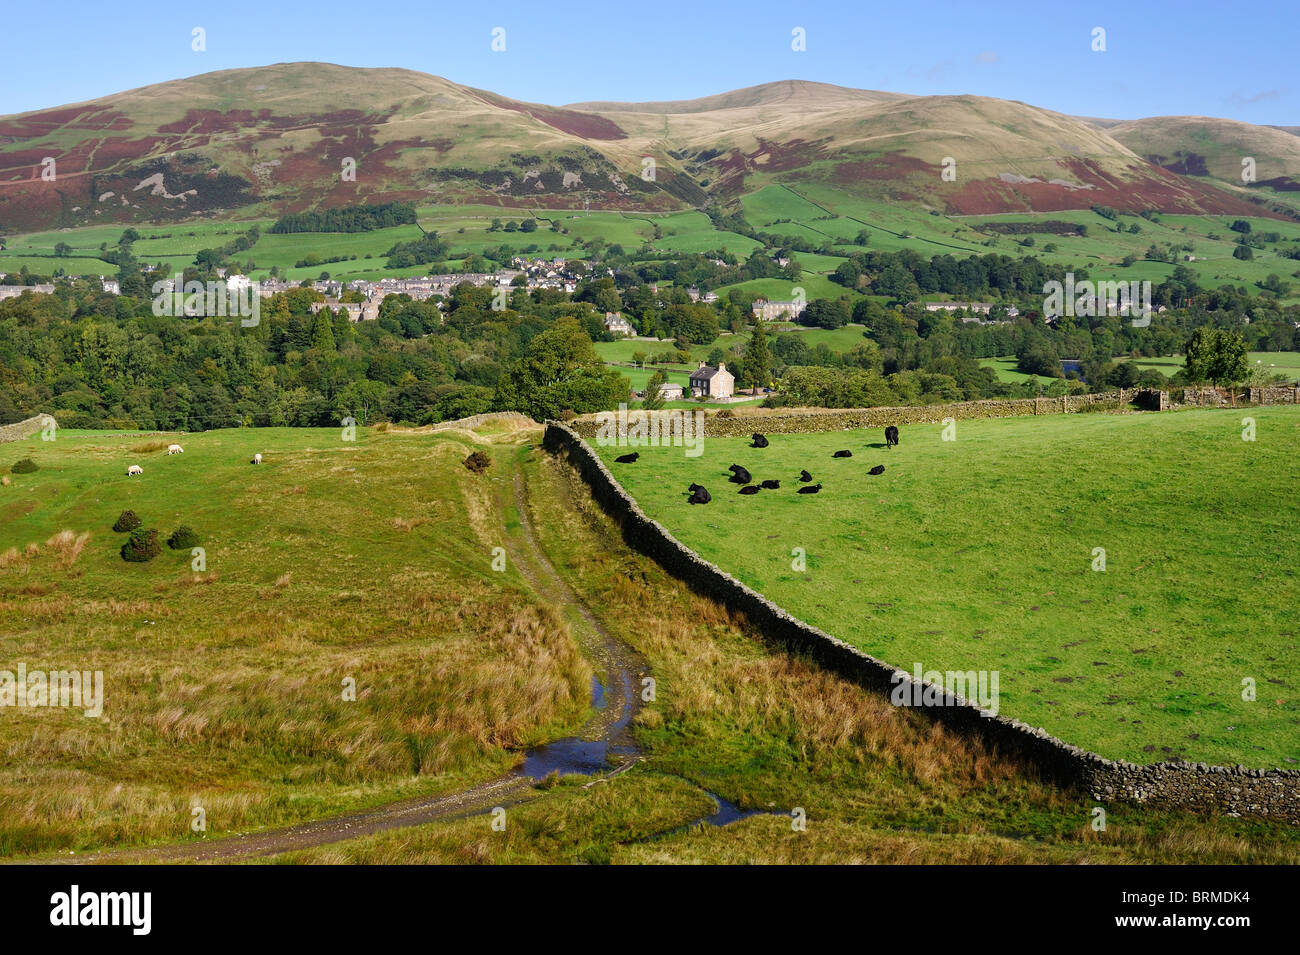 View of the town of Sedbergh and The Howgill Fells, Yorkshire Dales National Park, UK Stock Photo